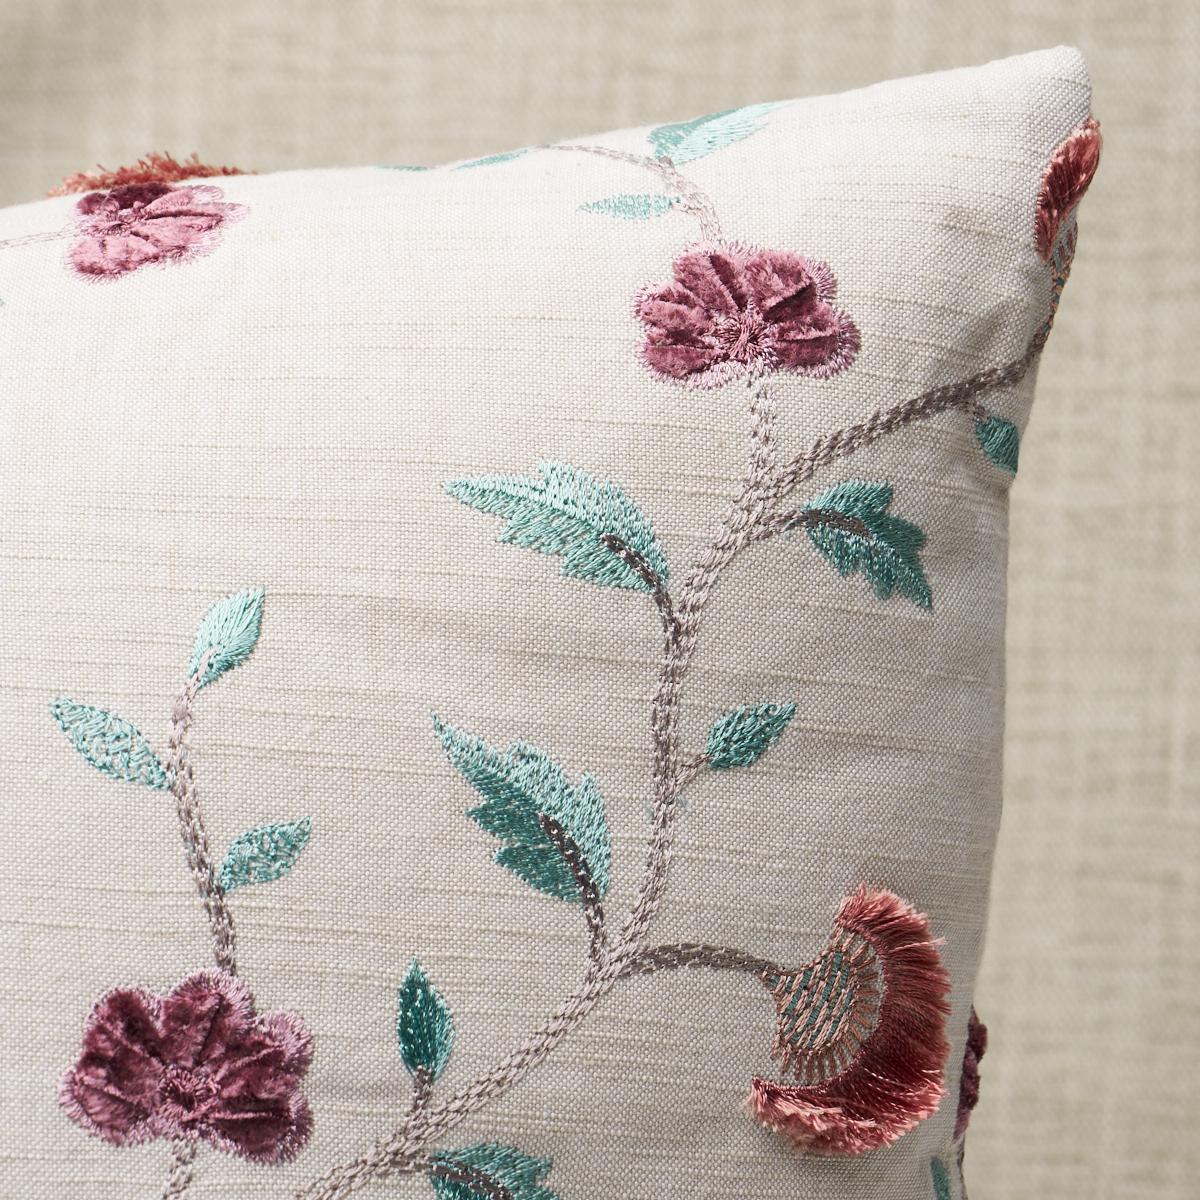 This pillow features Iyla Embroidery with a knife edge finish. Silky, chenille yarns and hand cut fringe give Iyla Embroidery its magnificent texture, extraordinary movement and a gorgeous, three-dimensional effect. Pillow includes a feather/down